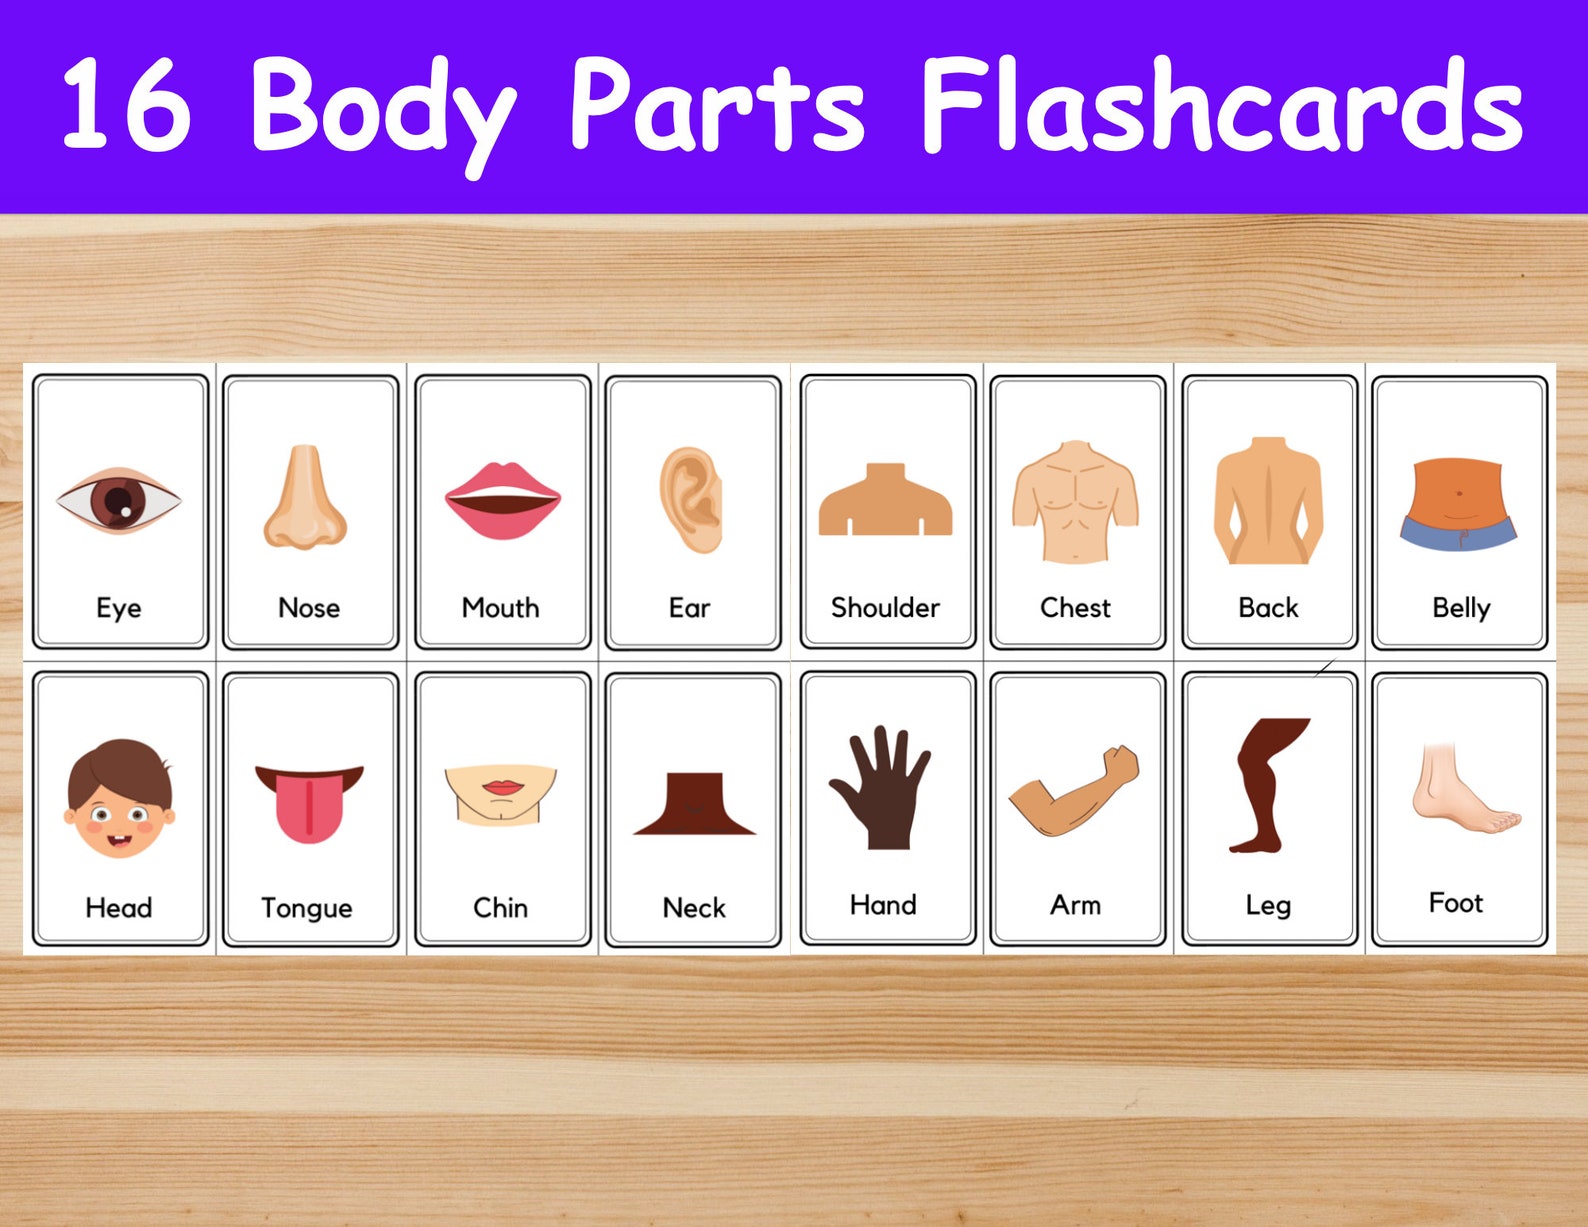 16-body-parts-flashcards-image-cards-for-kids-preschoolers-etsy